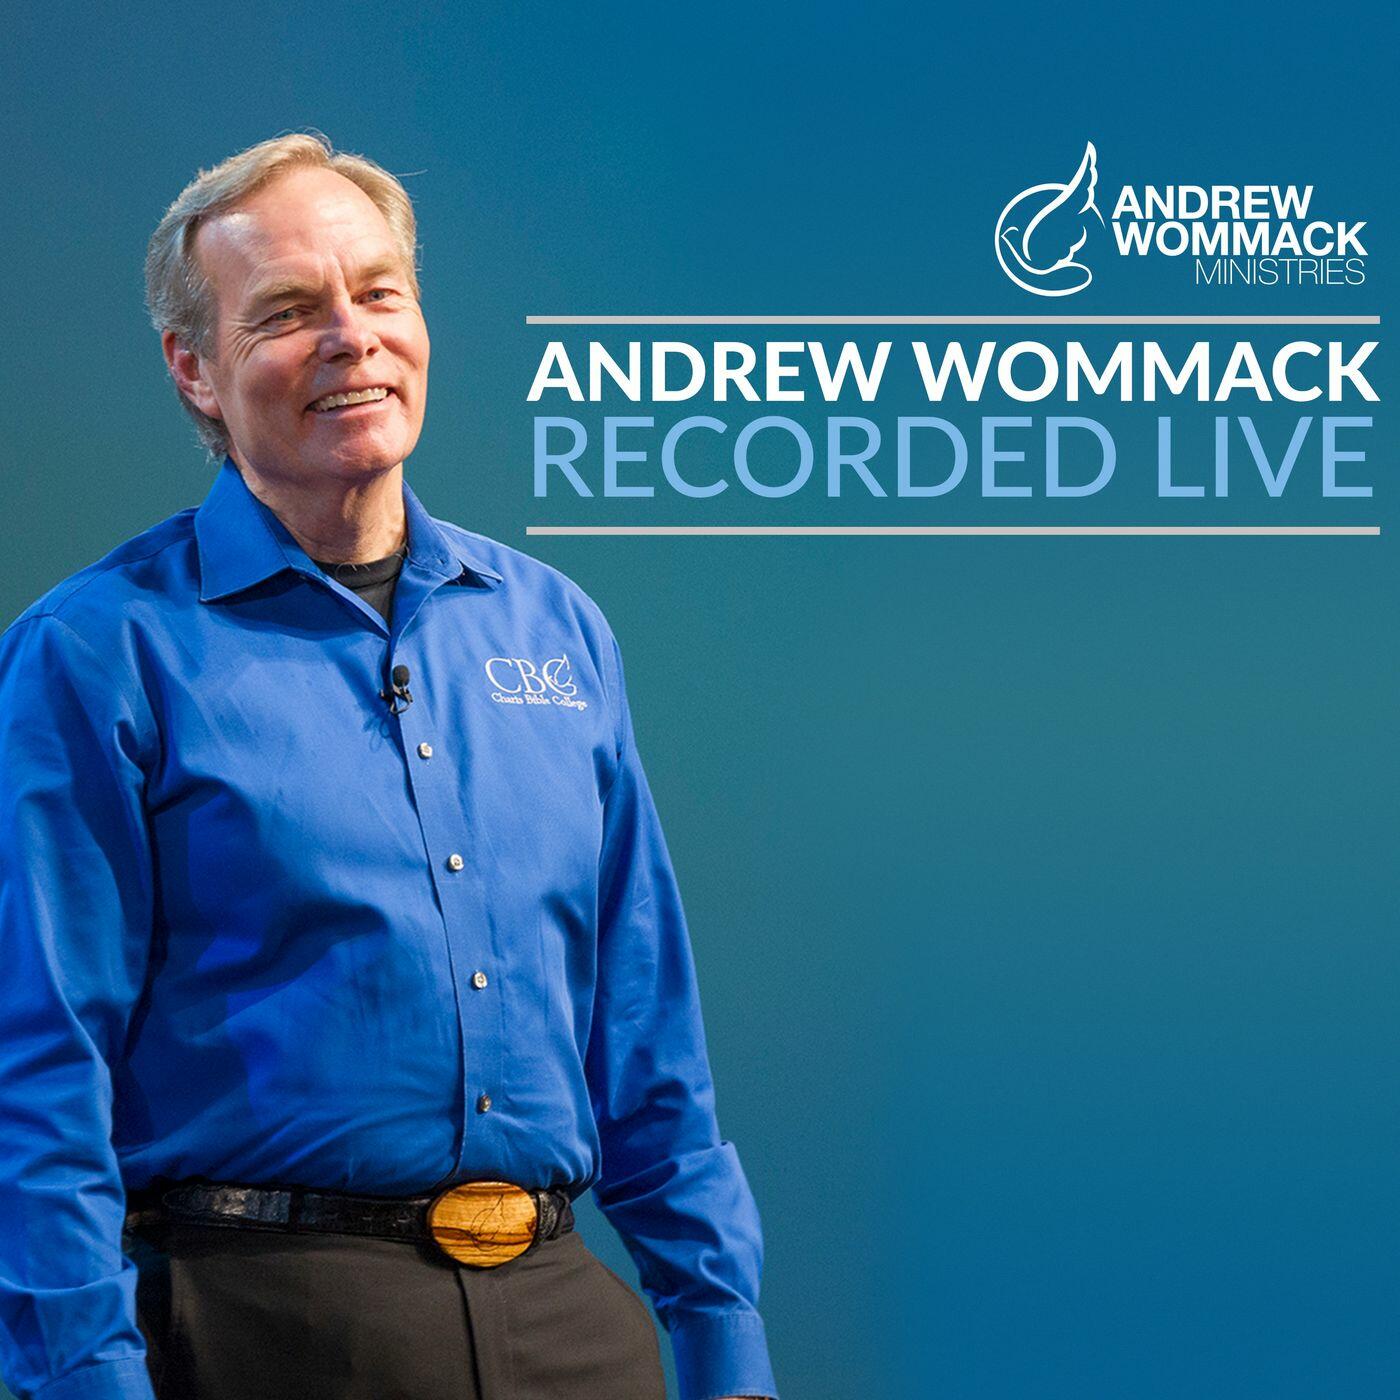 Andrew Wommack Recorded Live iHeart